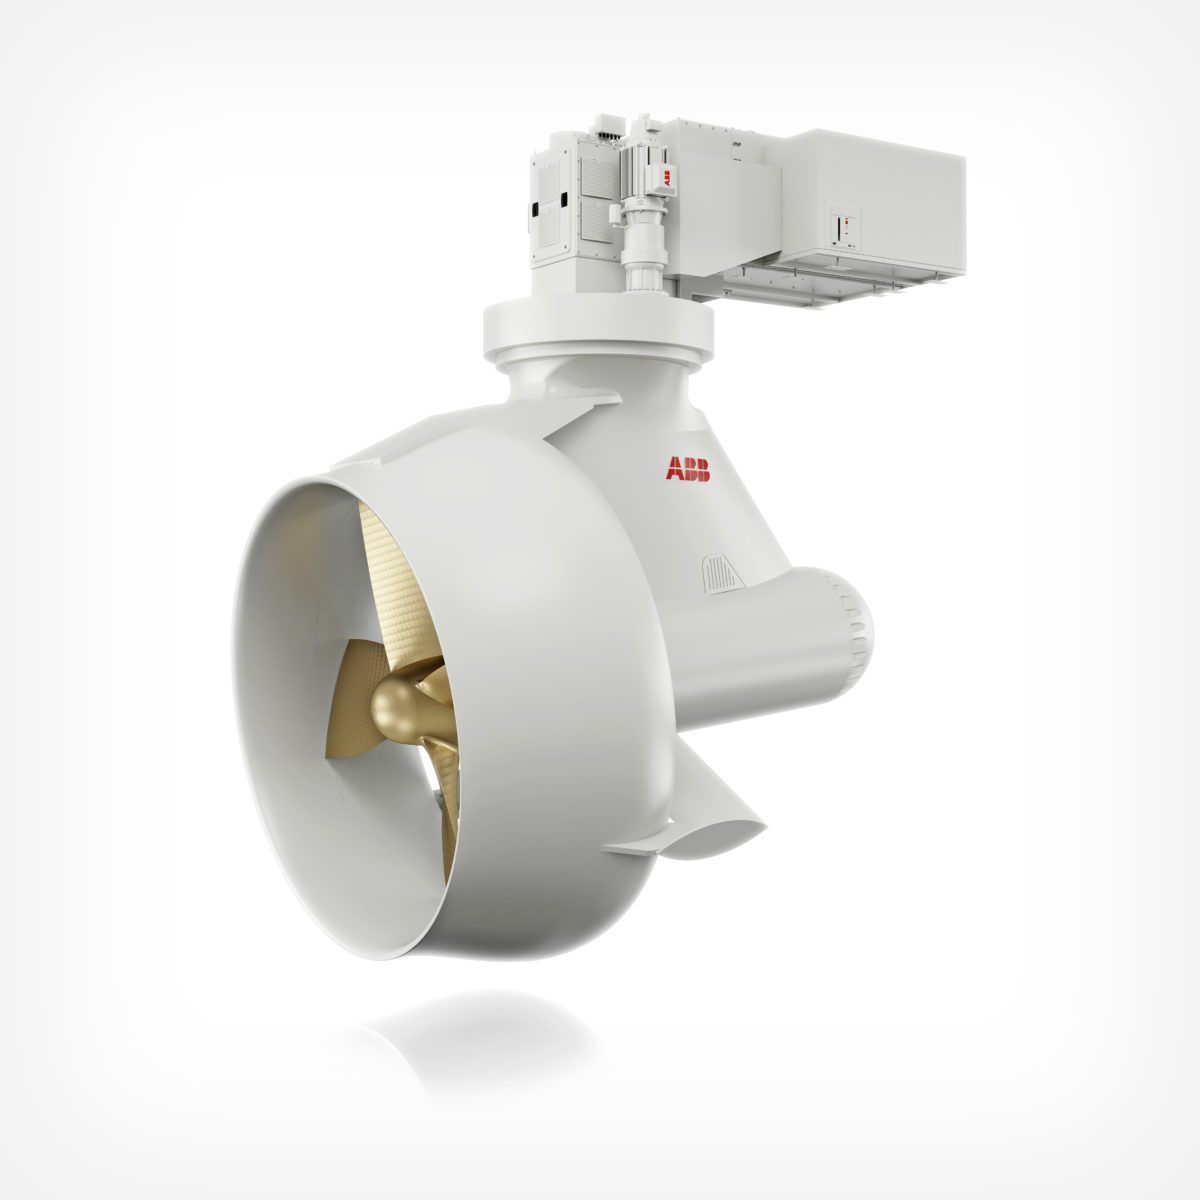 ABB’s first Azipod® D propulsion system now in operation